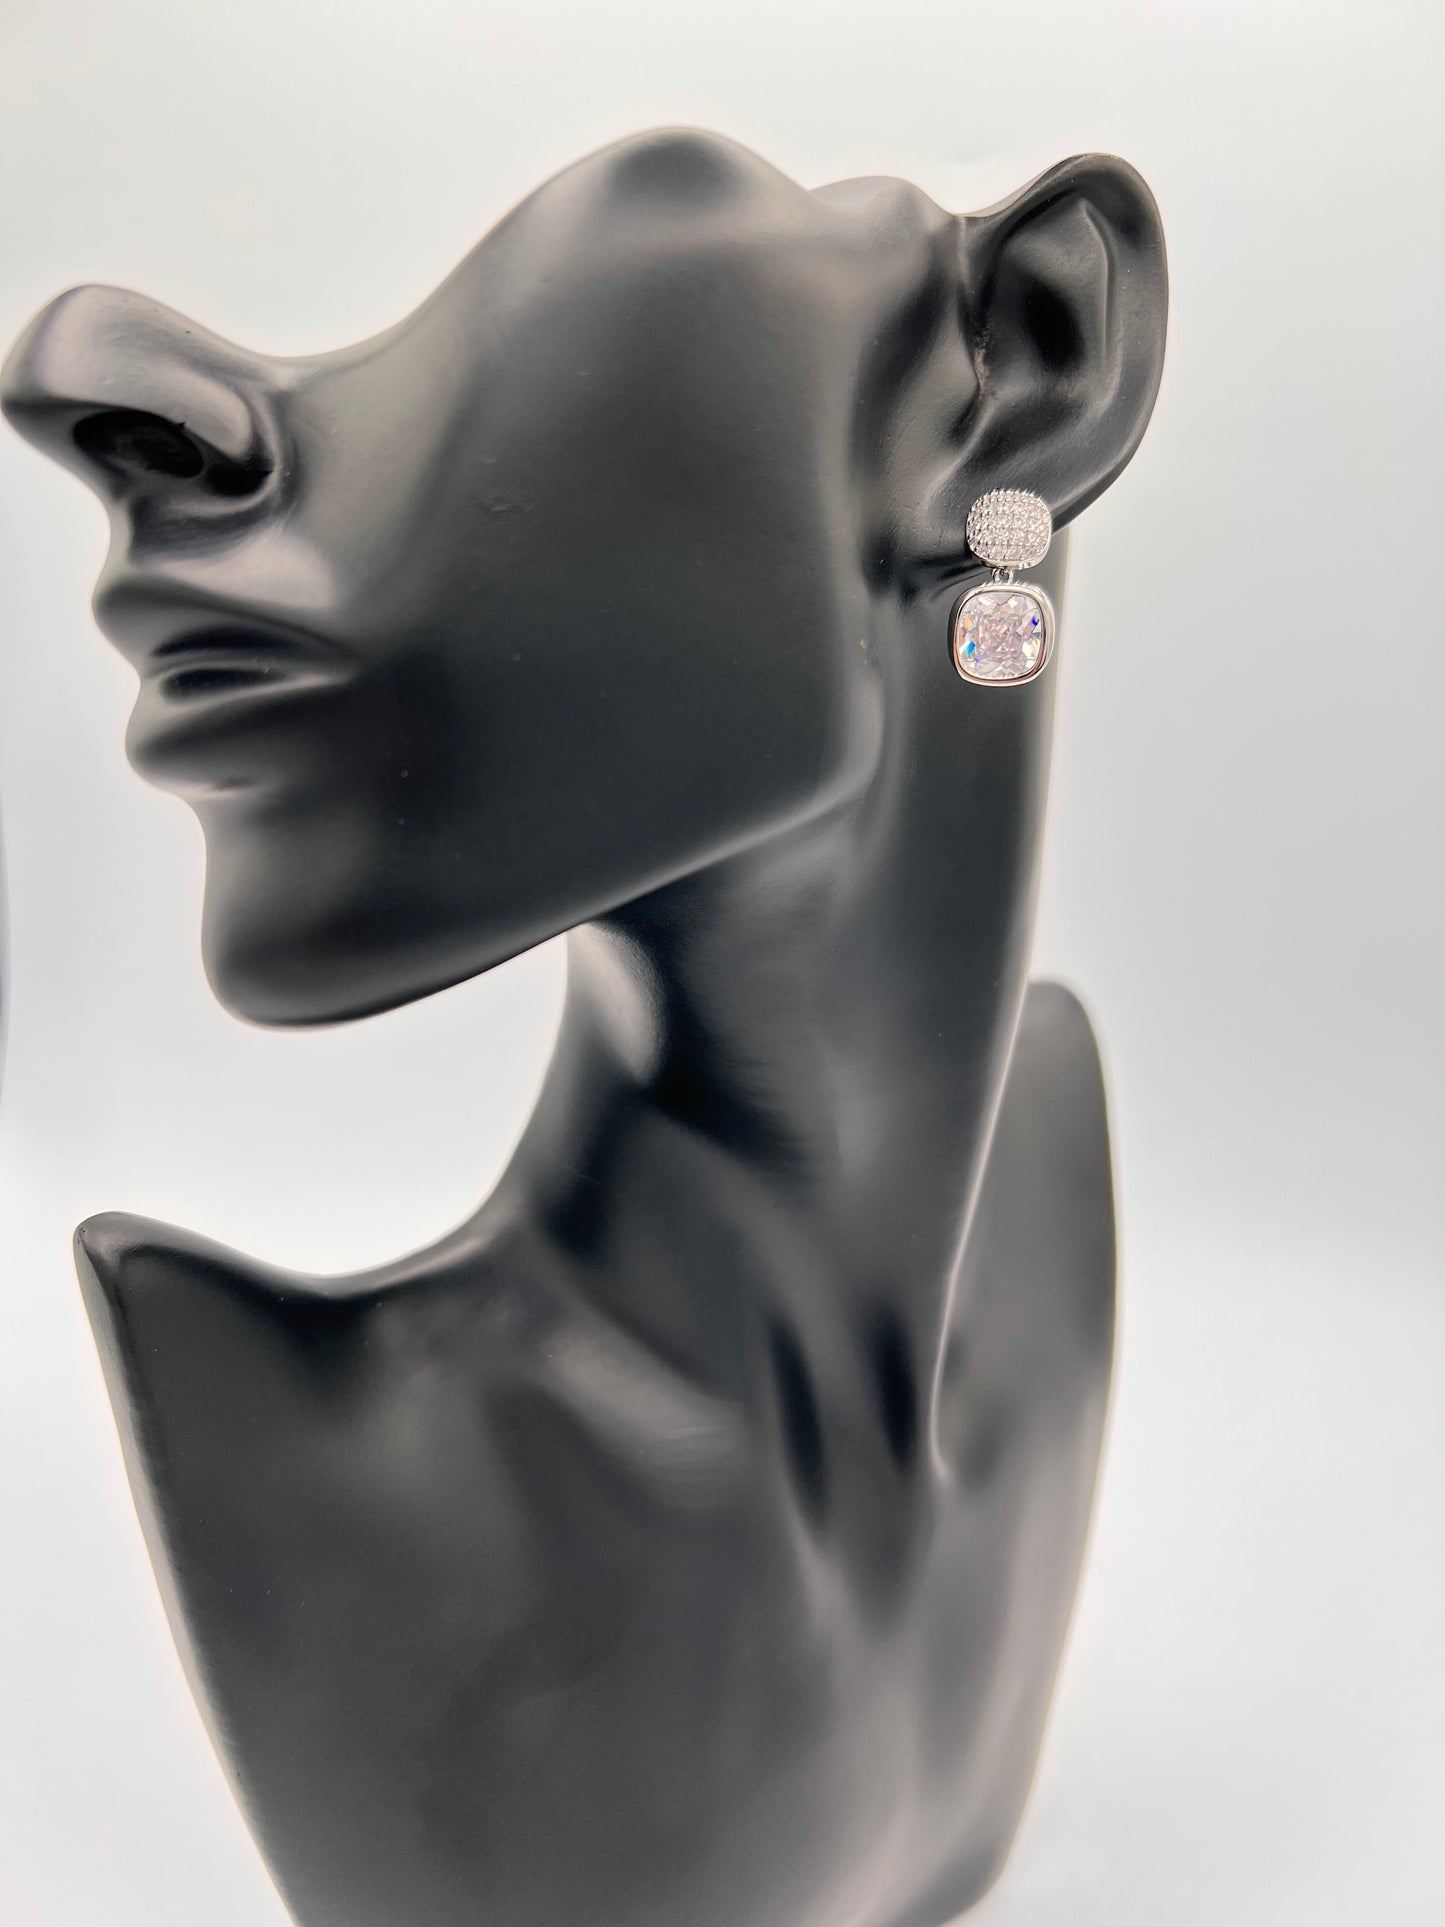 Two Square Coco Silver Earrings